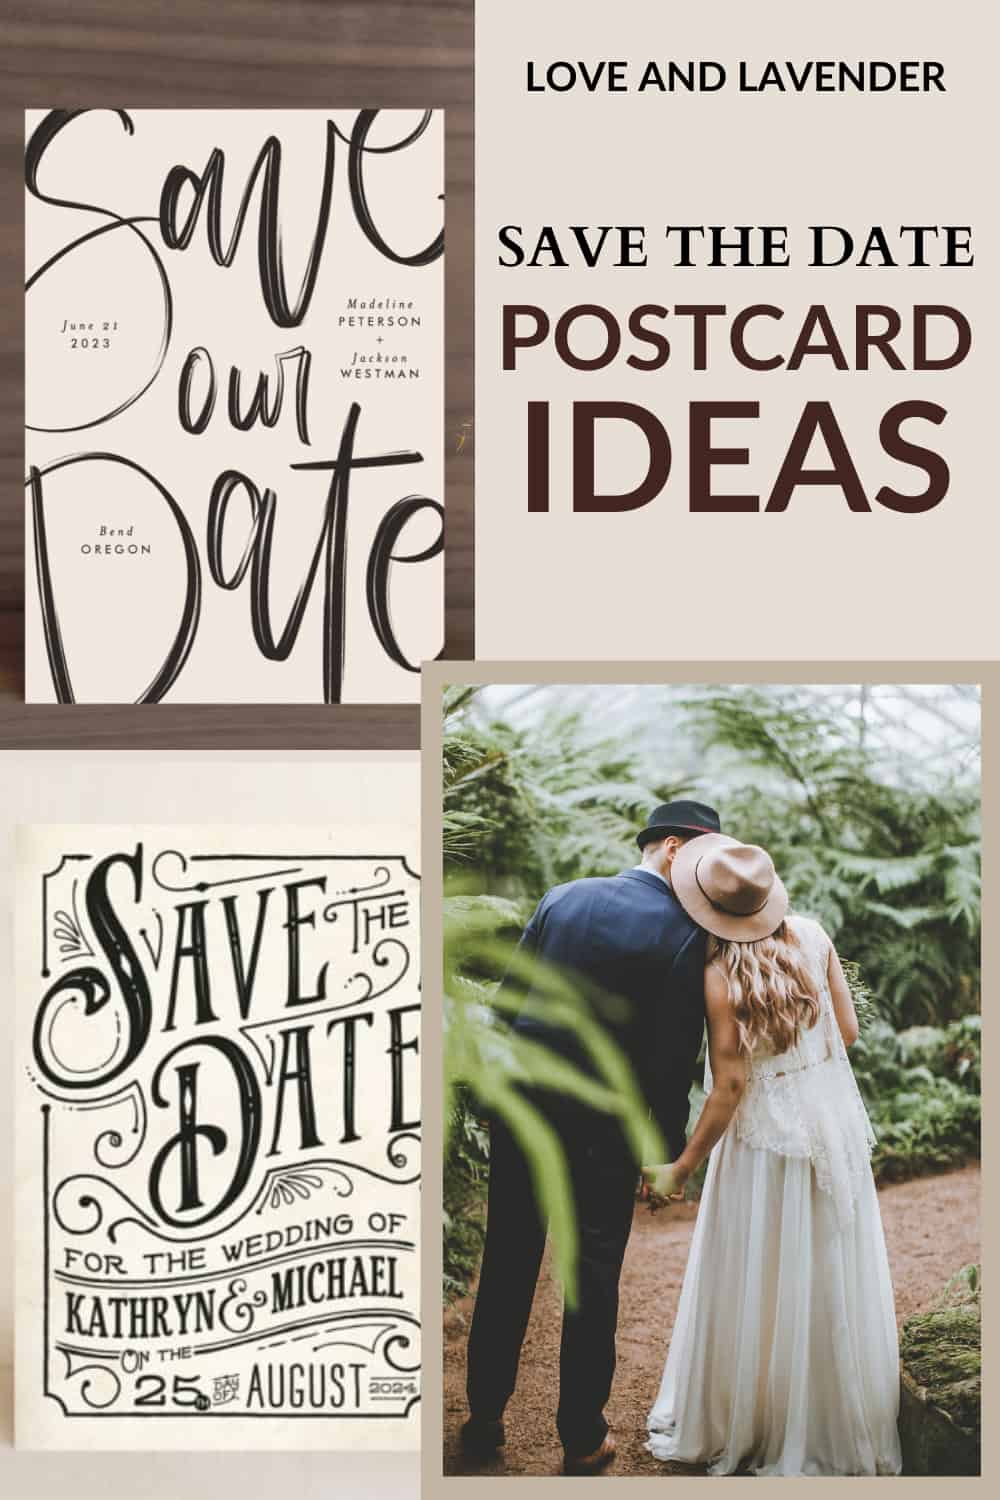 Save the Date Postcards - Pinterest pin